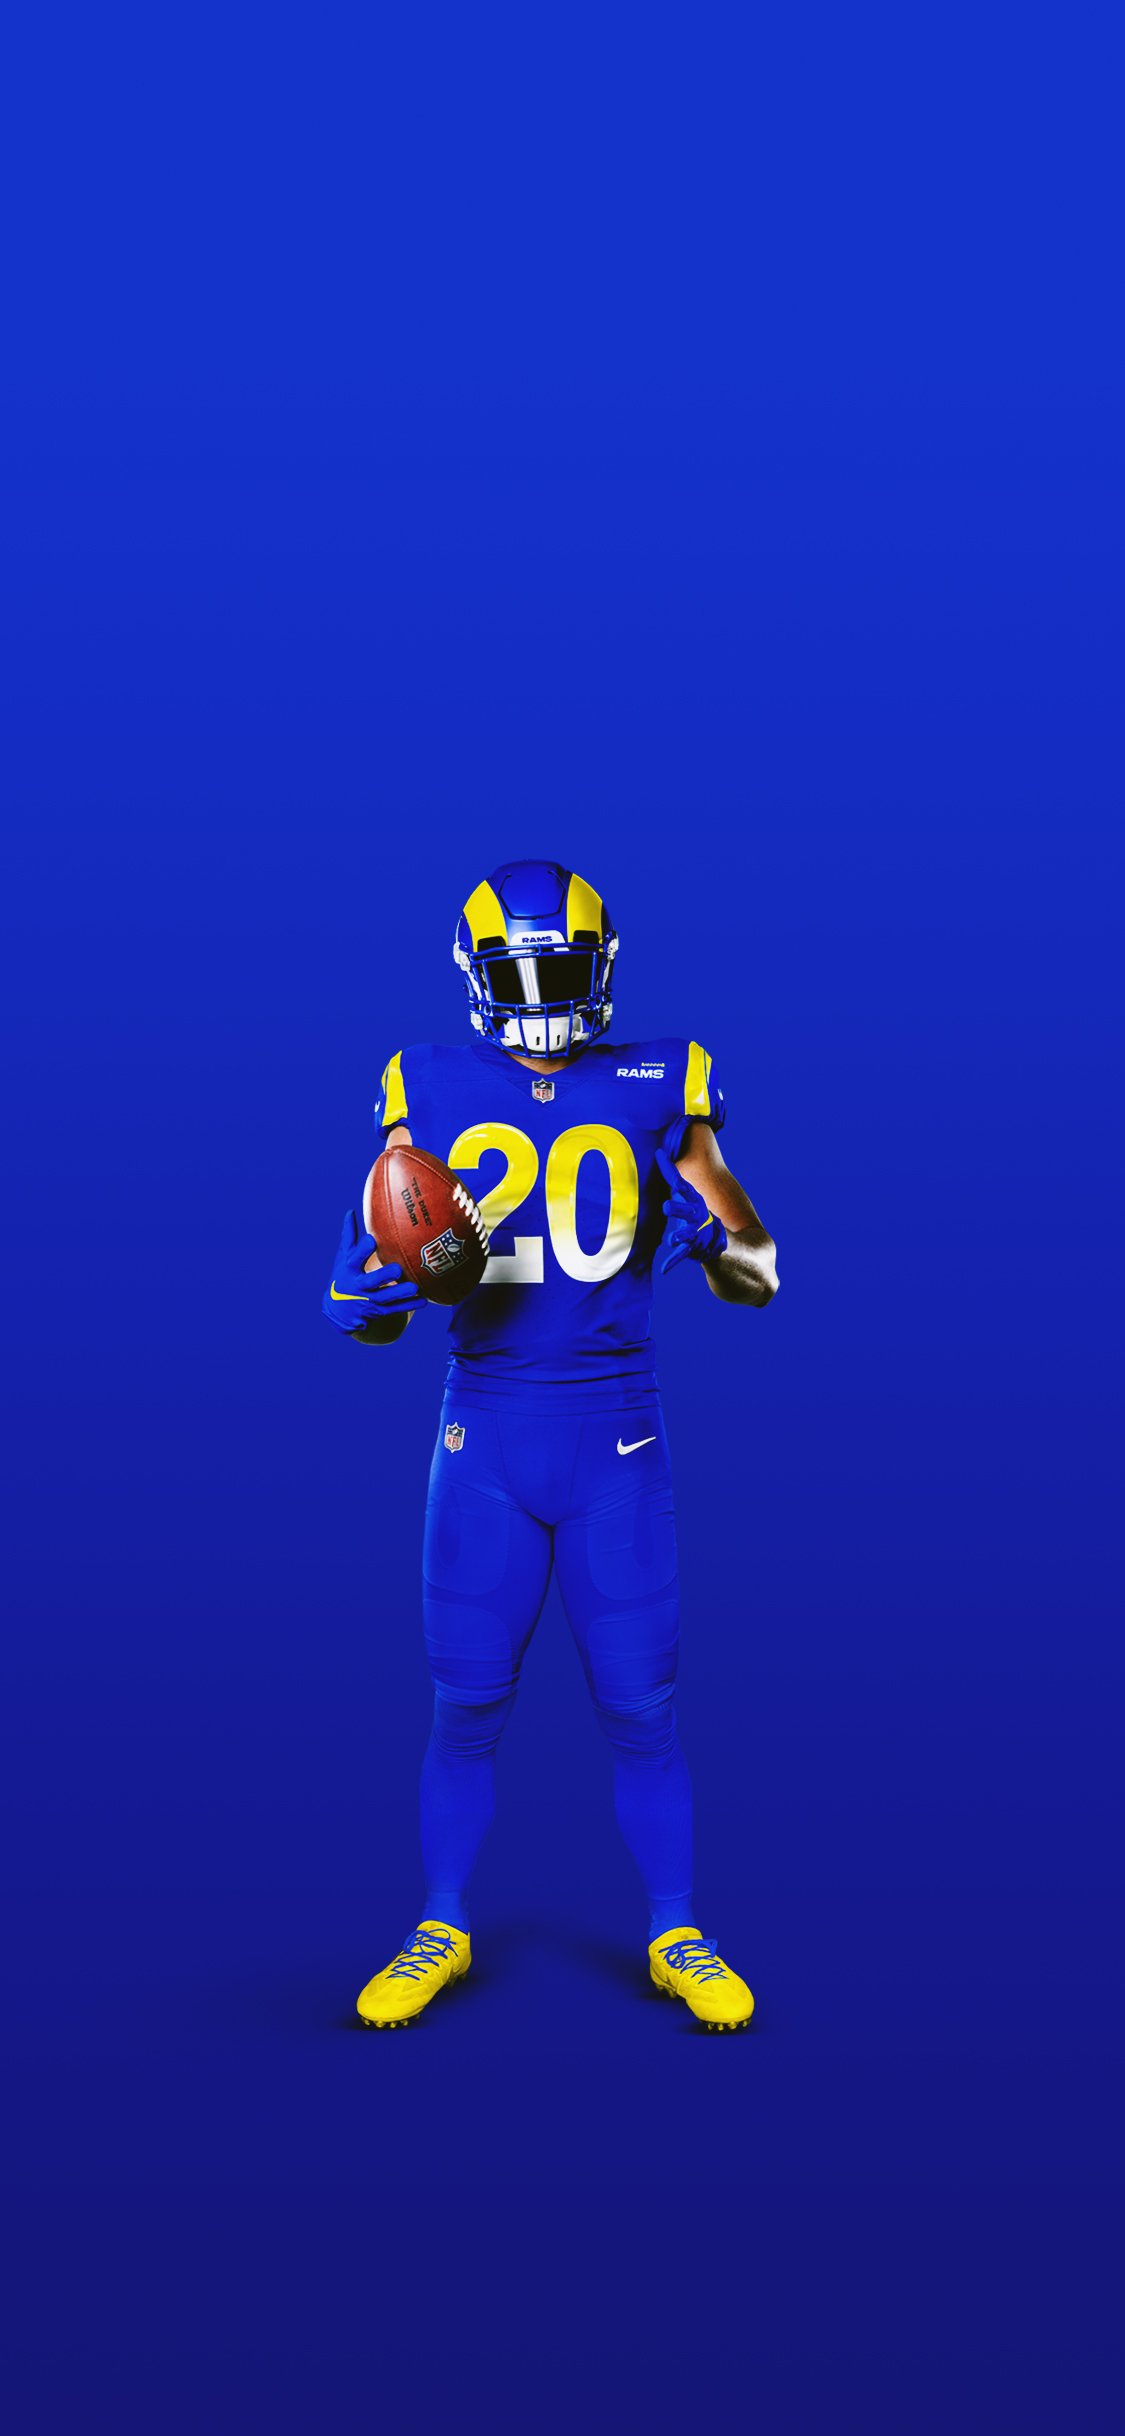 Free download Rams Wallpaper Los Angeles Rams theramscom [1125x2436] for your Desktop, Mobile & Tablet. Explore Rams Wallpaper. LA Rams Wallpaper, Rams Desktop Wallpaper, LA Rams Wallpaper